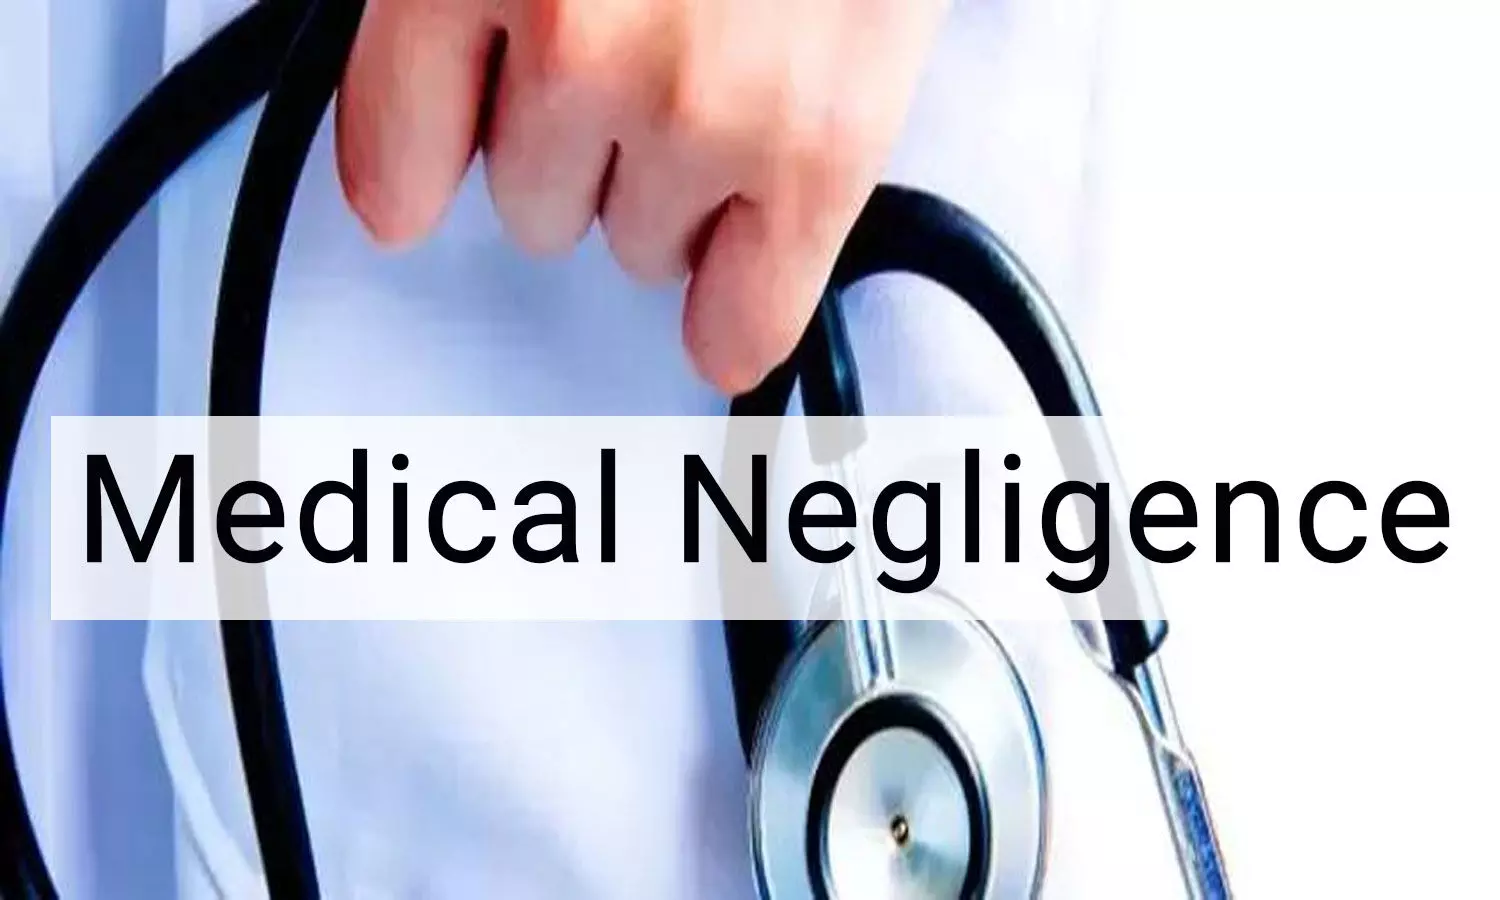 Hyderabad: Former Congress leader moves SHRC with medical negligence complaint